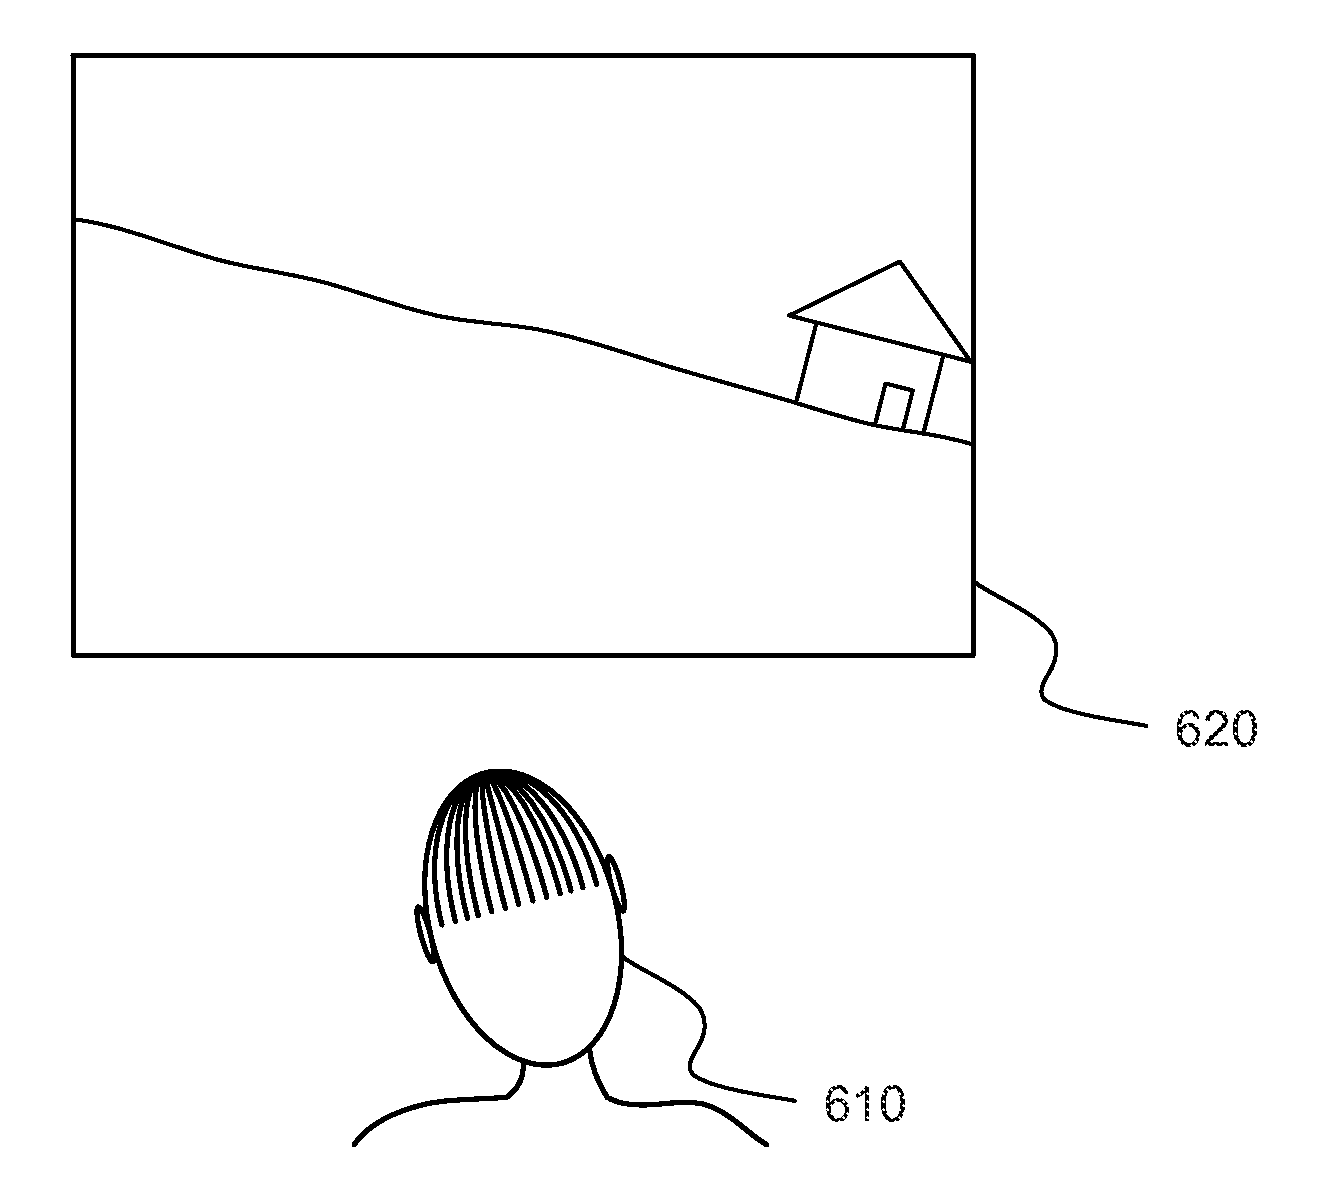 Systems and methods for changing behavior of computer program elements based on gaze input